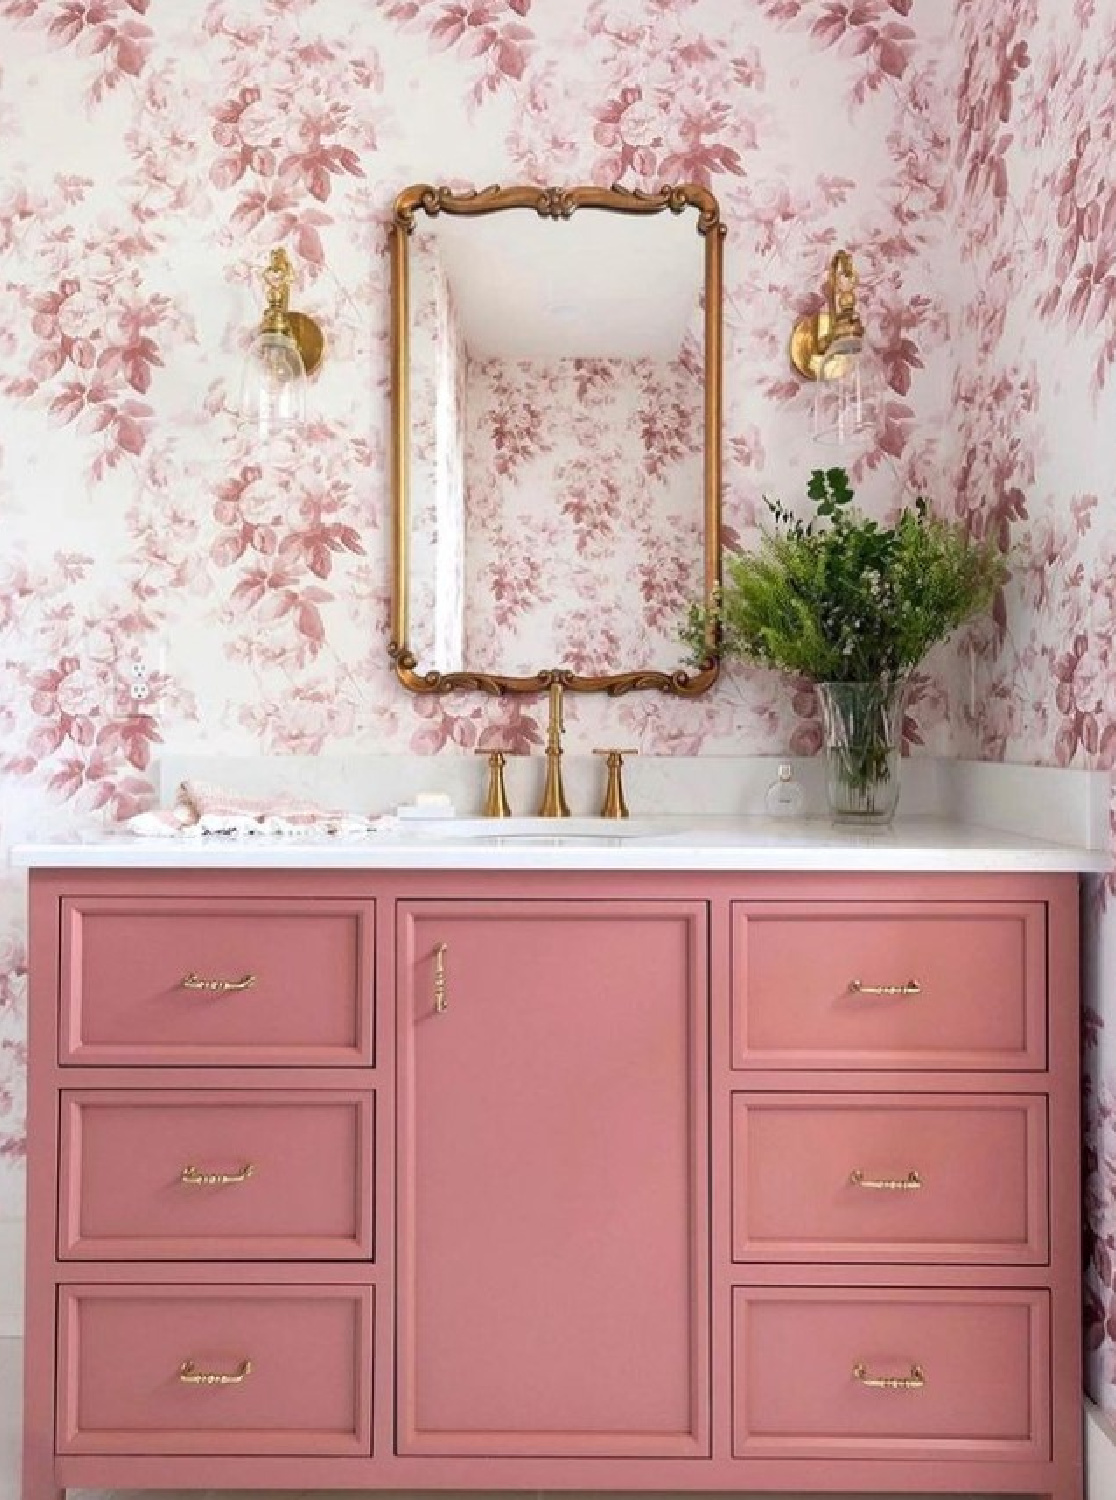 @homesbygardengate -Rose toile wallpaper in a beautiful bath with rose painted vanity and gold toned mirror. #bathroomdesign #bathroomwallpaper